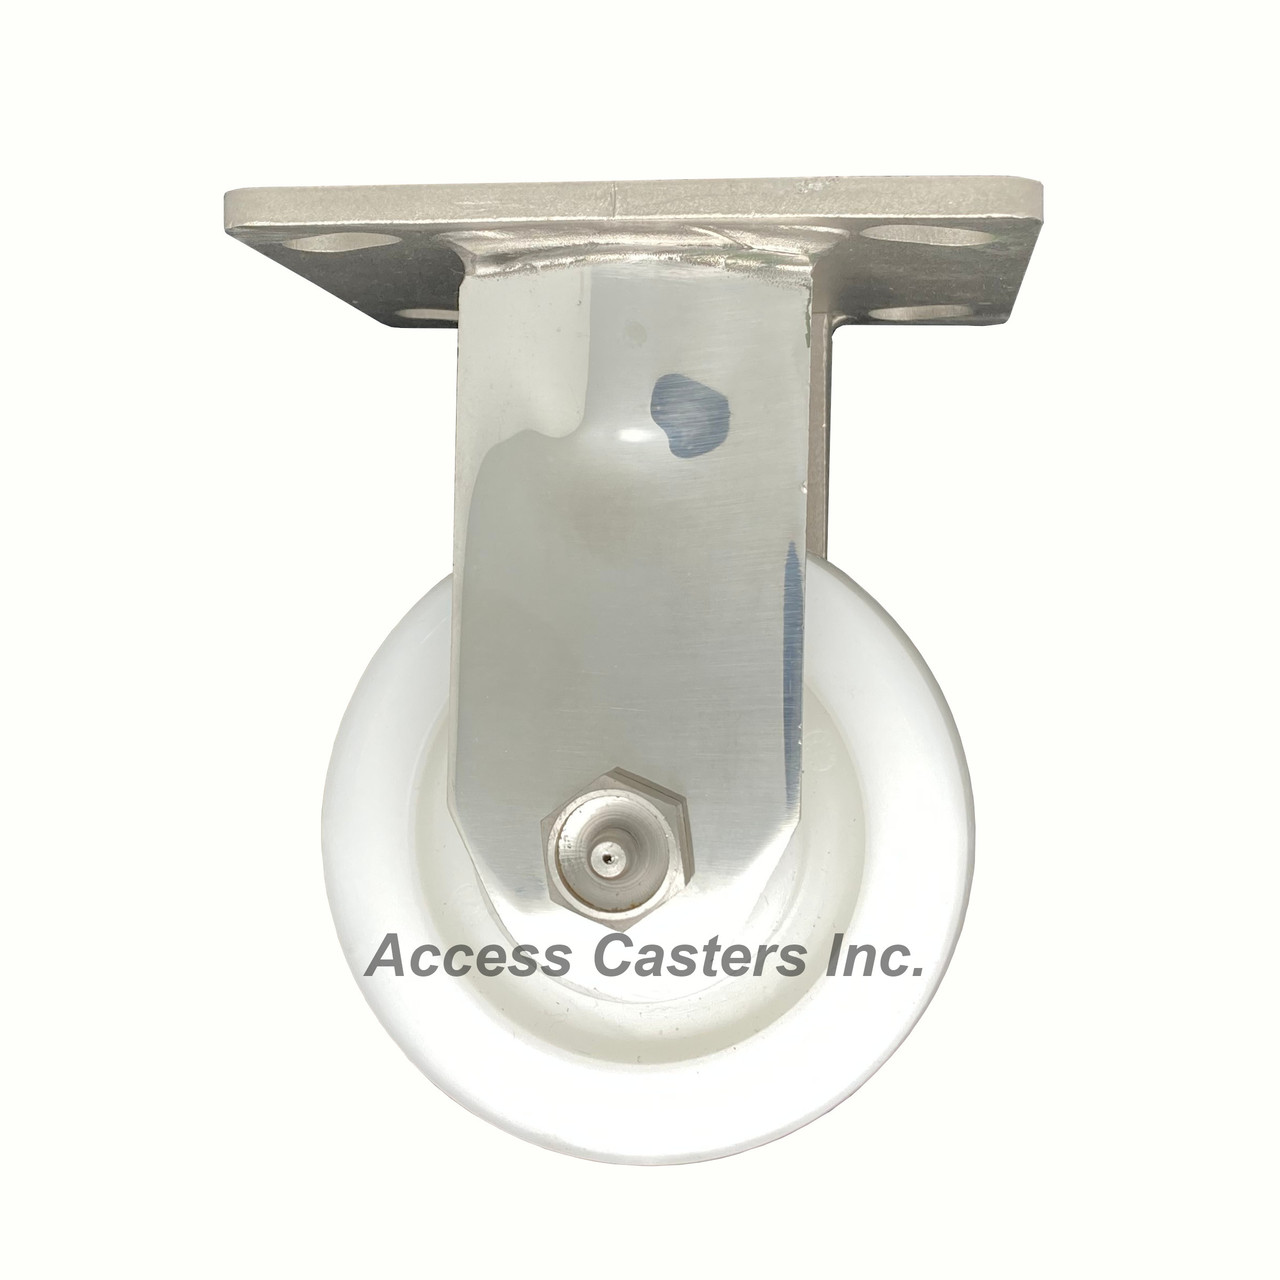 MD316NY4-R 4 Inch 316 Stainless Steel Rigid Caster with White Nylon Wheel